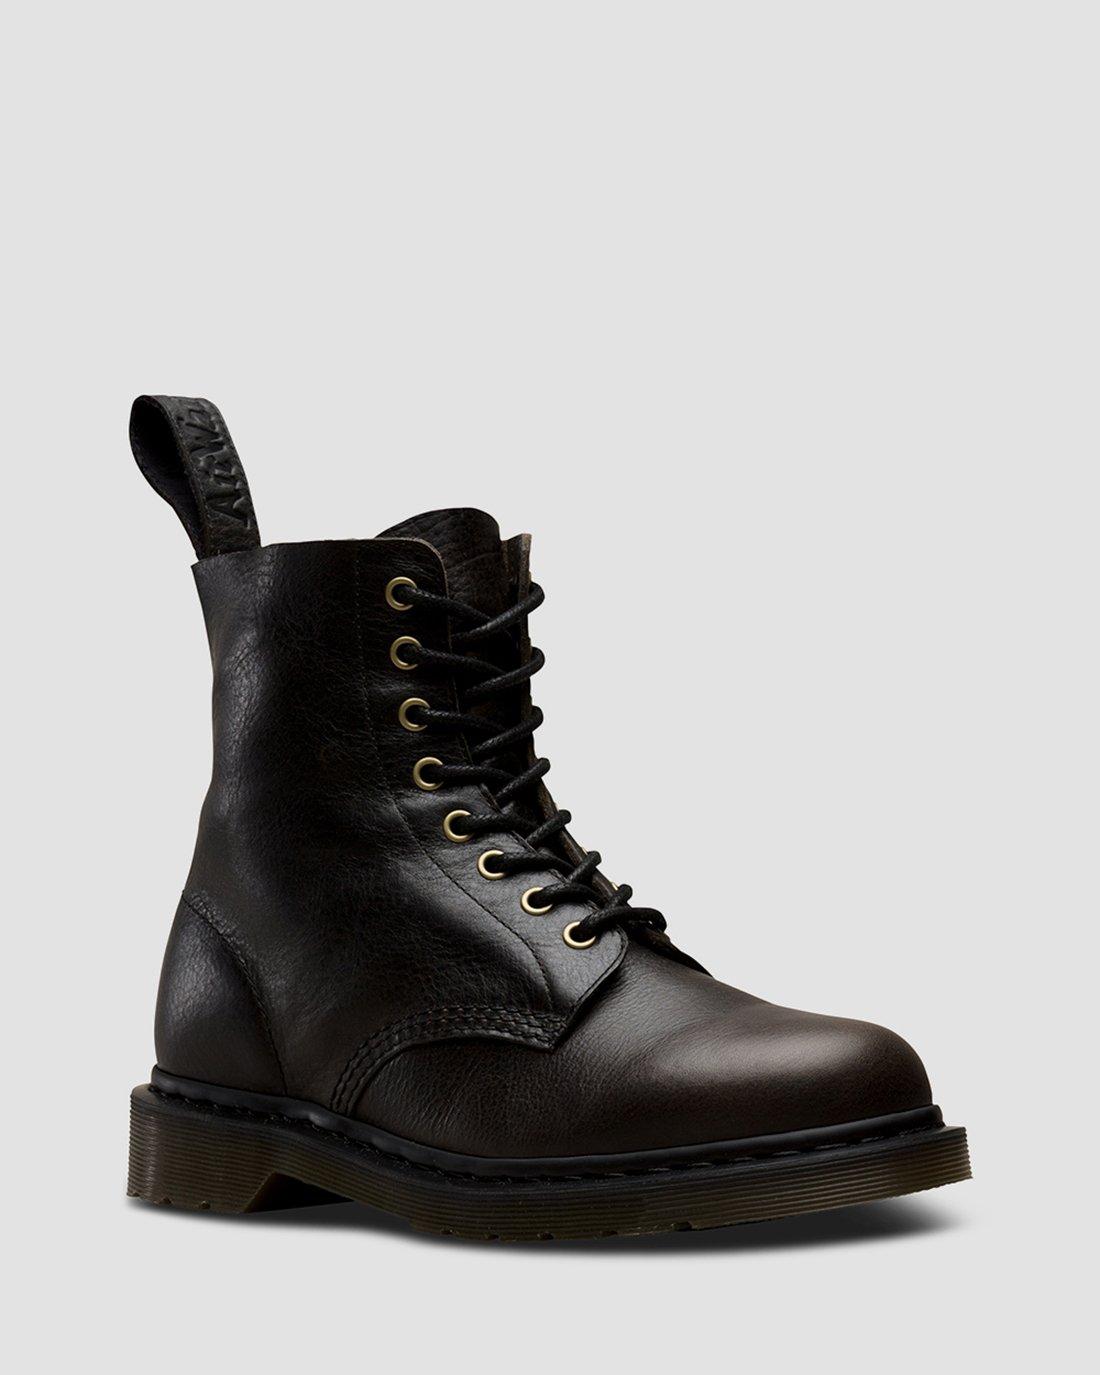 dr martens mens patent leather boots